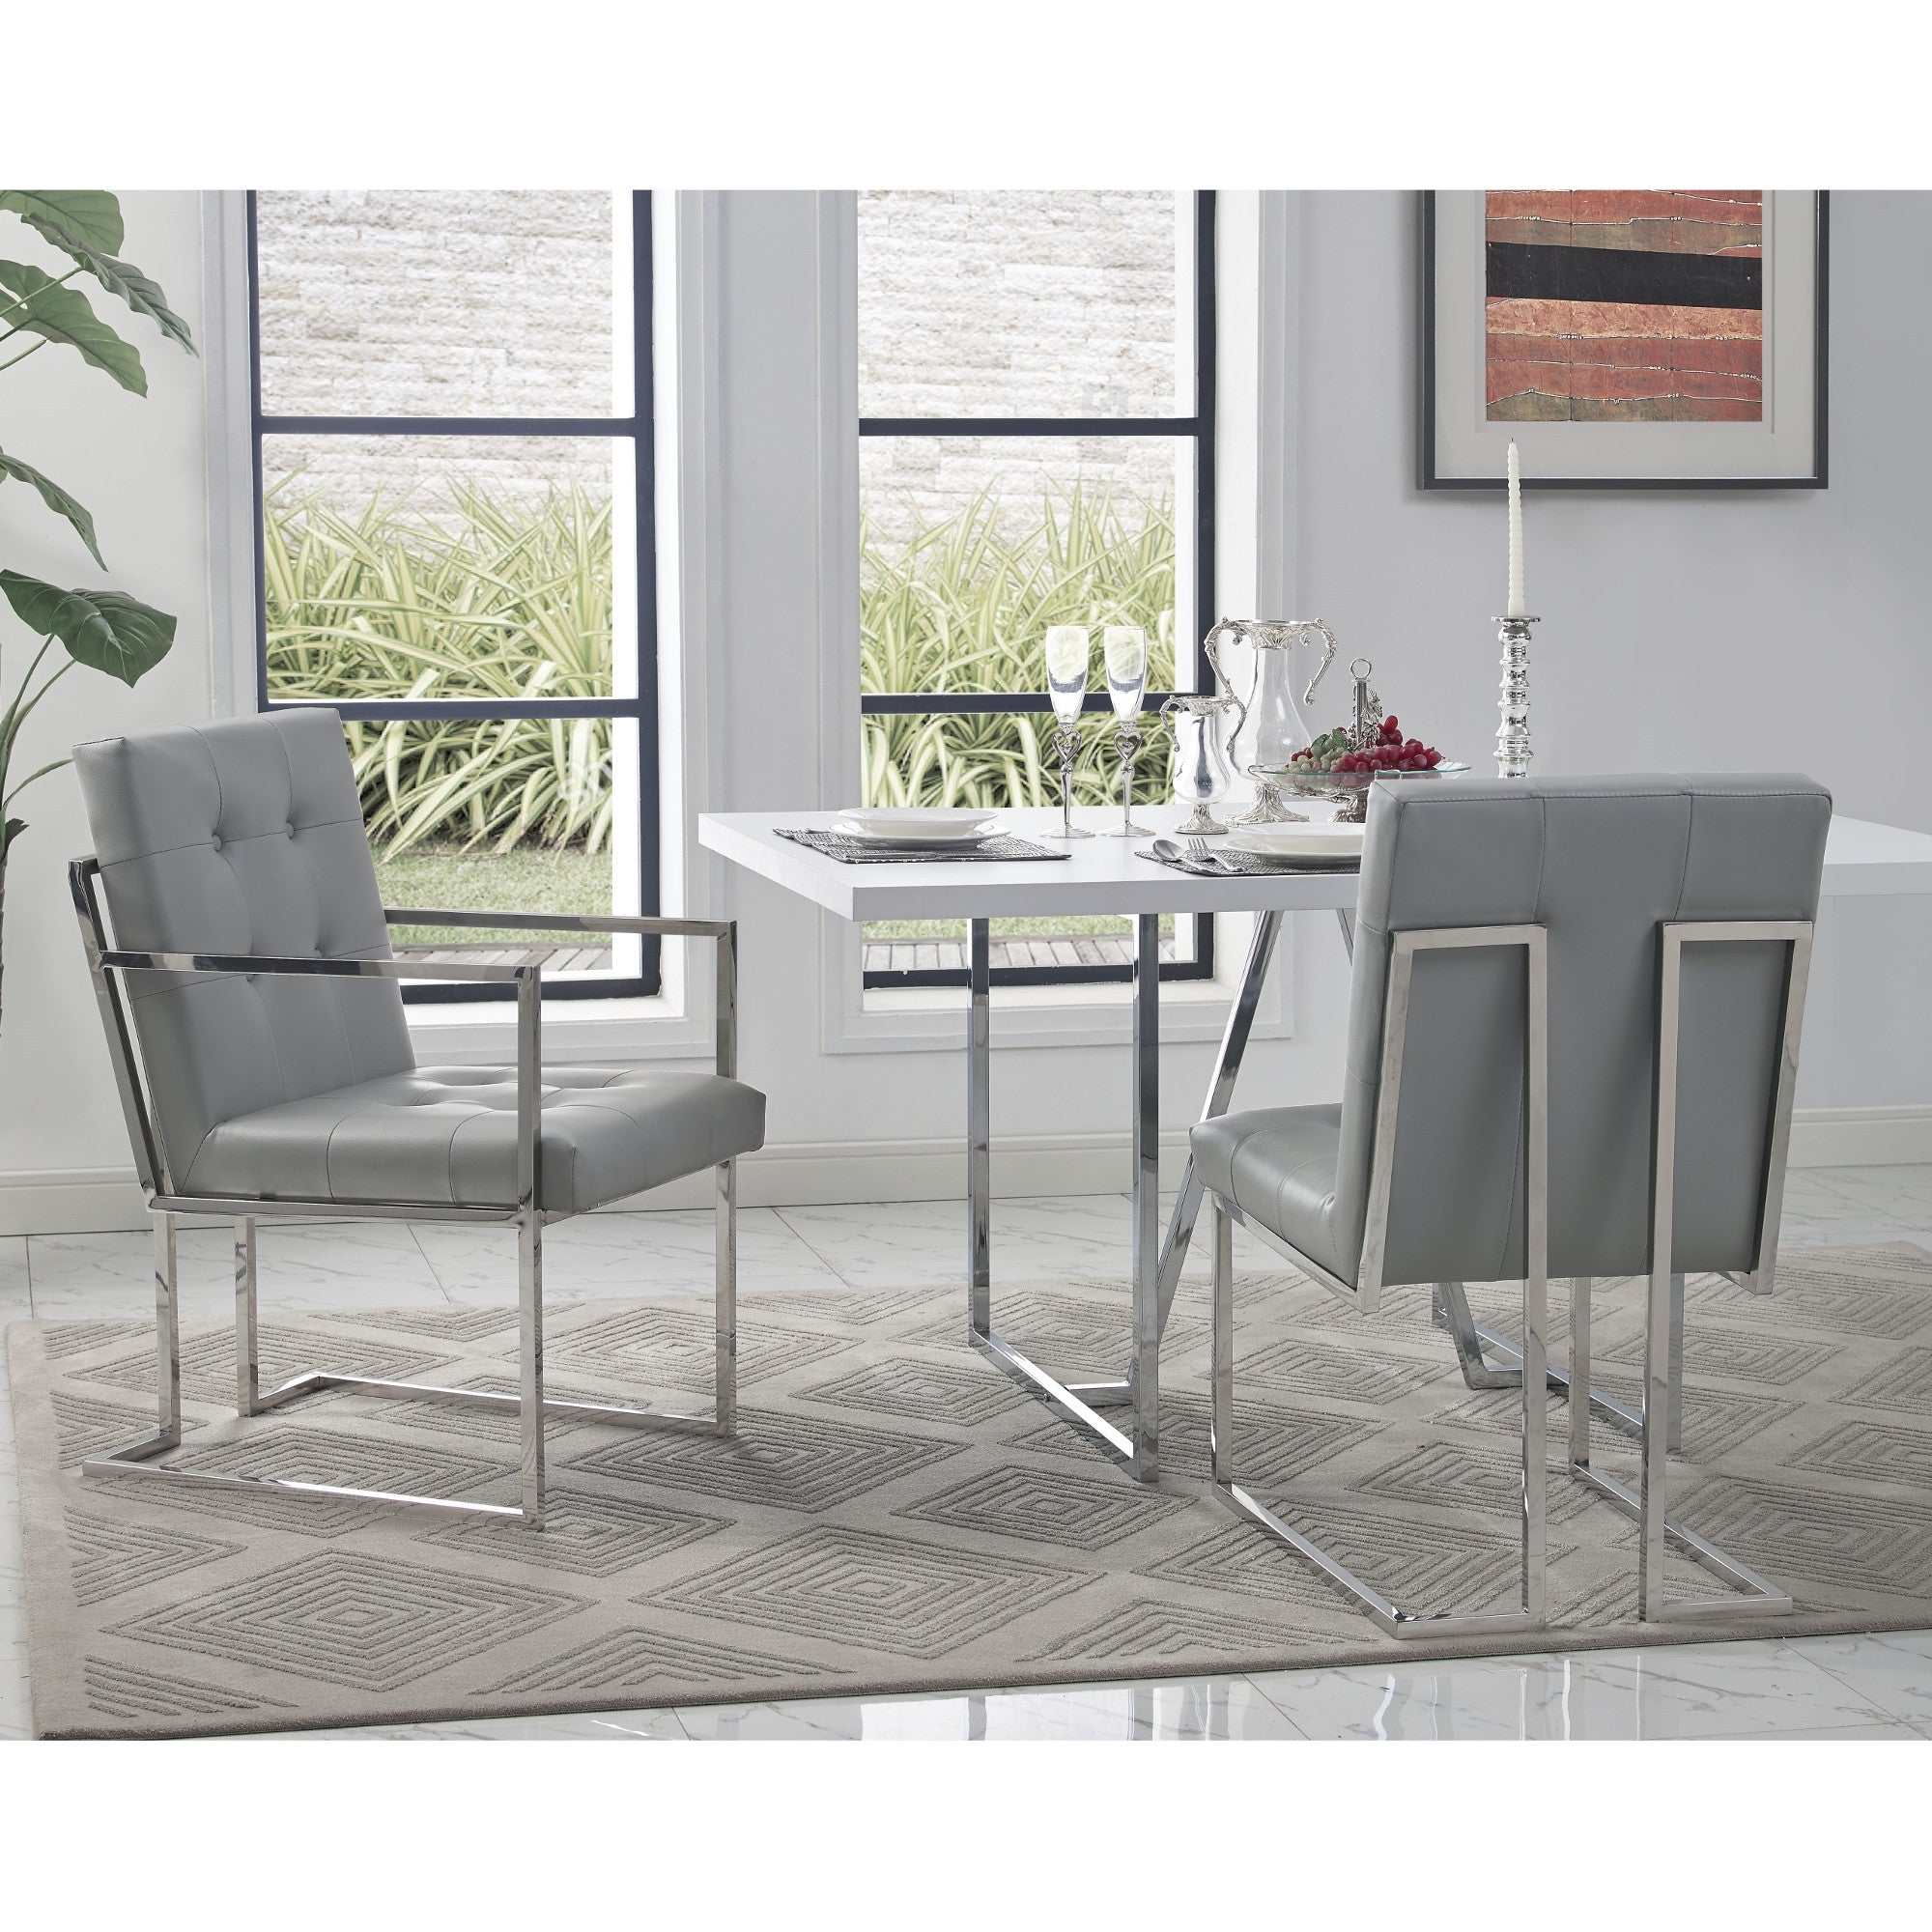 Set of Two Tufted Light Gray and Silver Metallic Upholstered Faux Leather Dining Arm Chairs